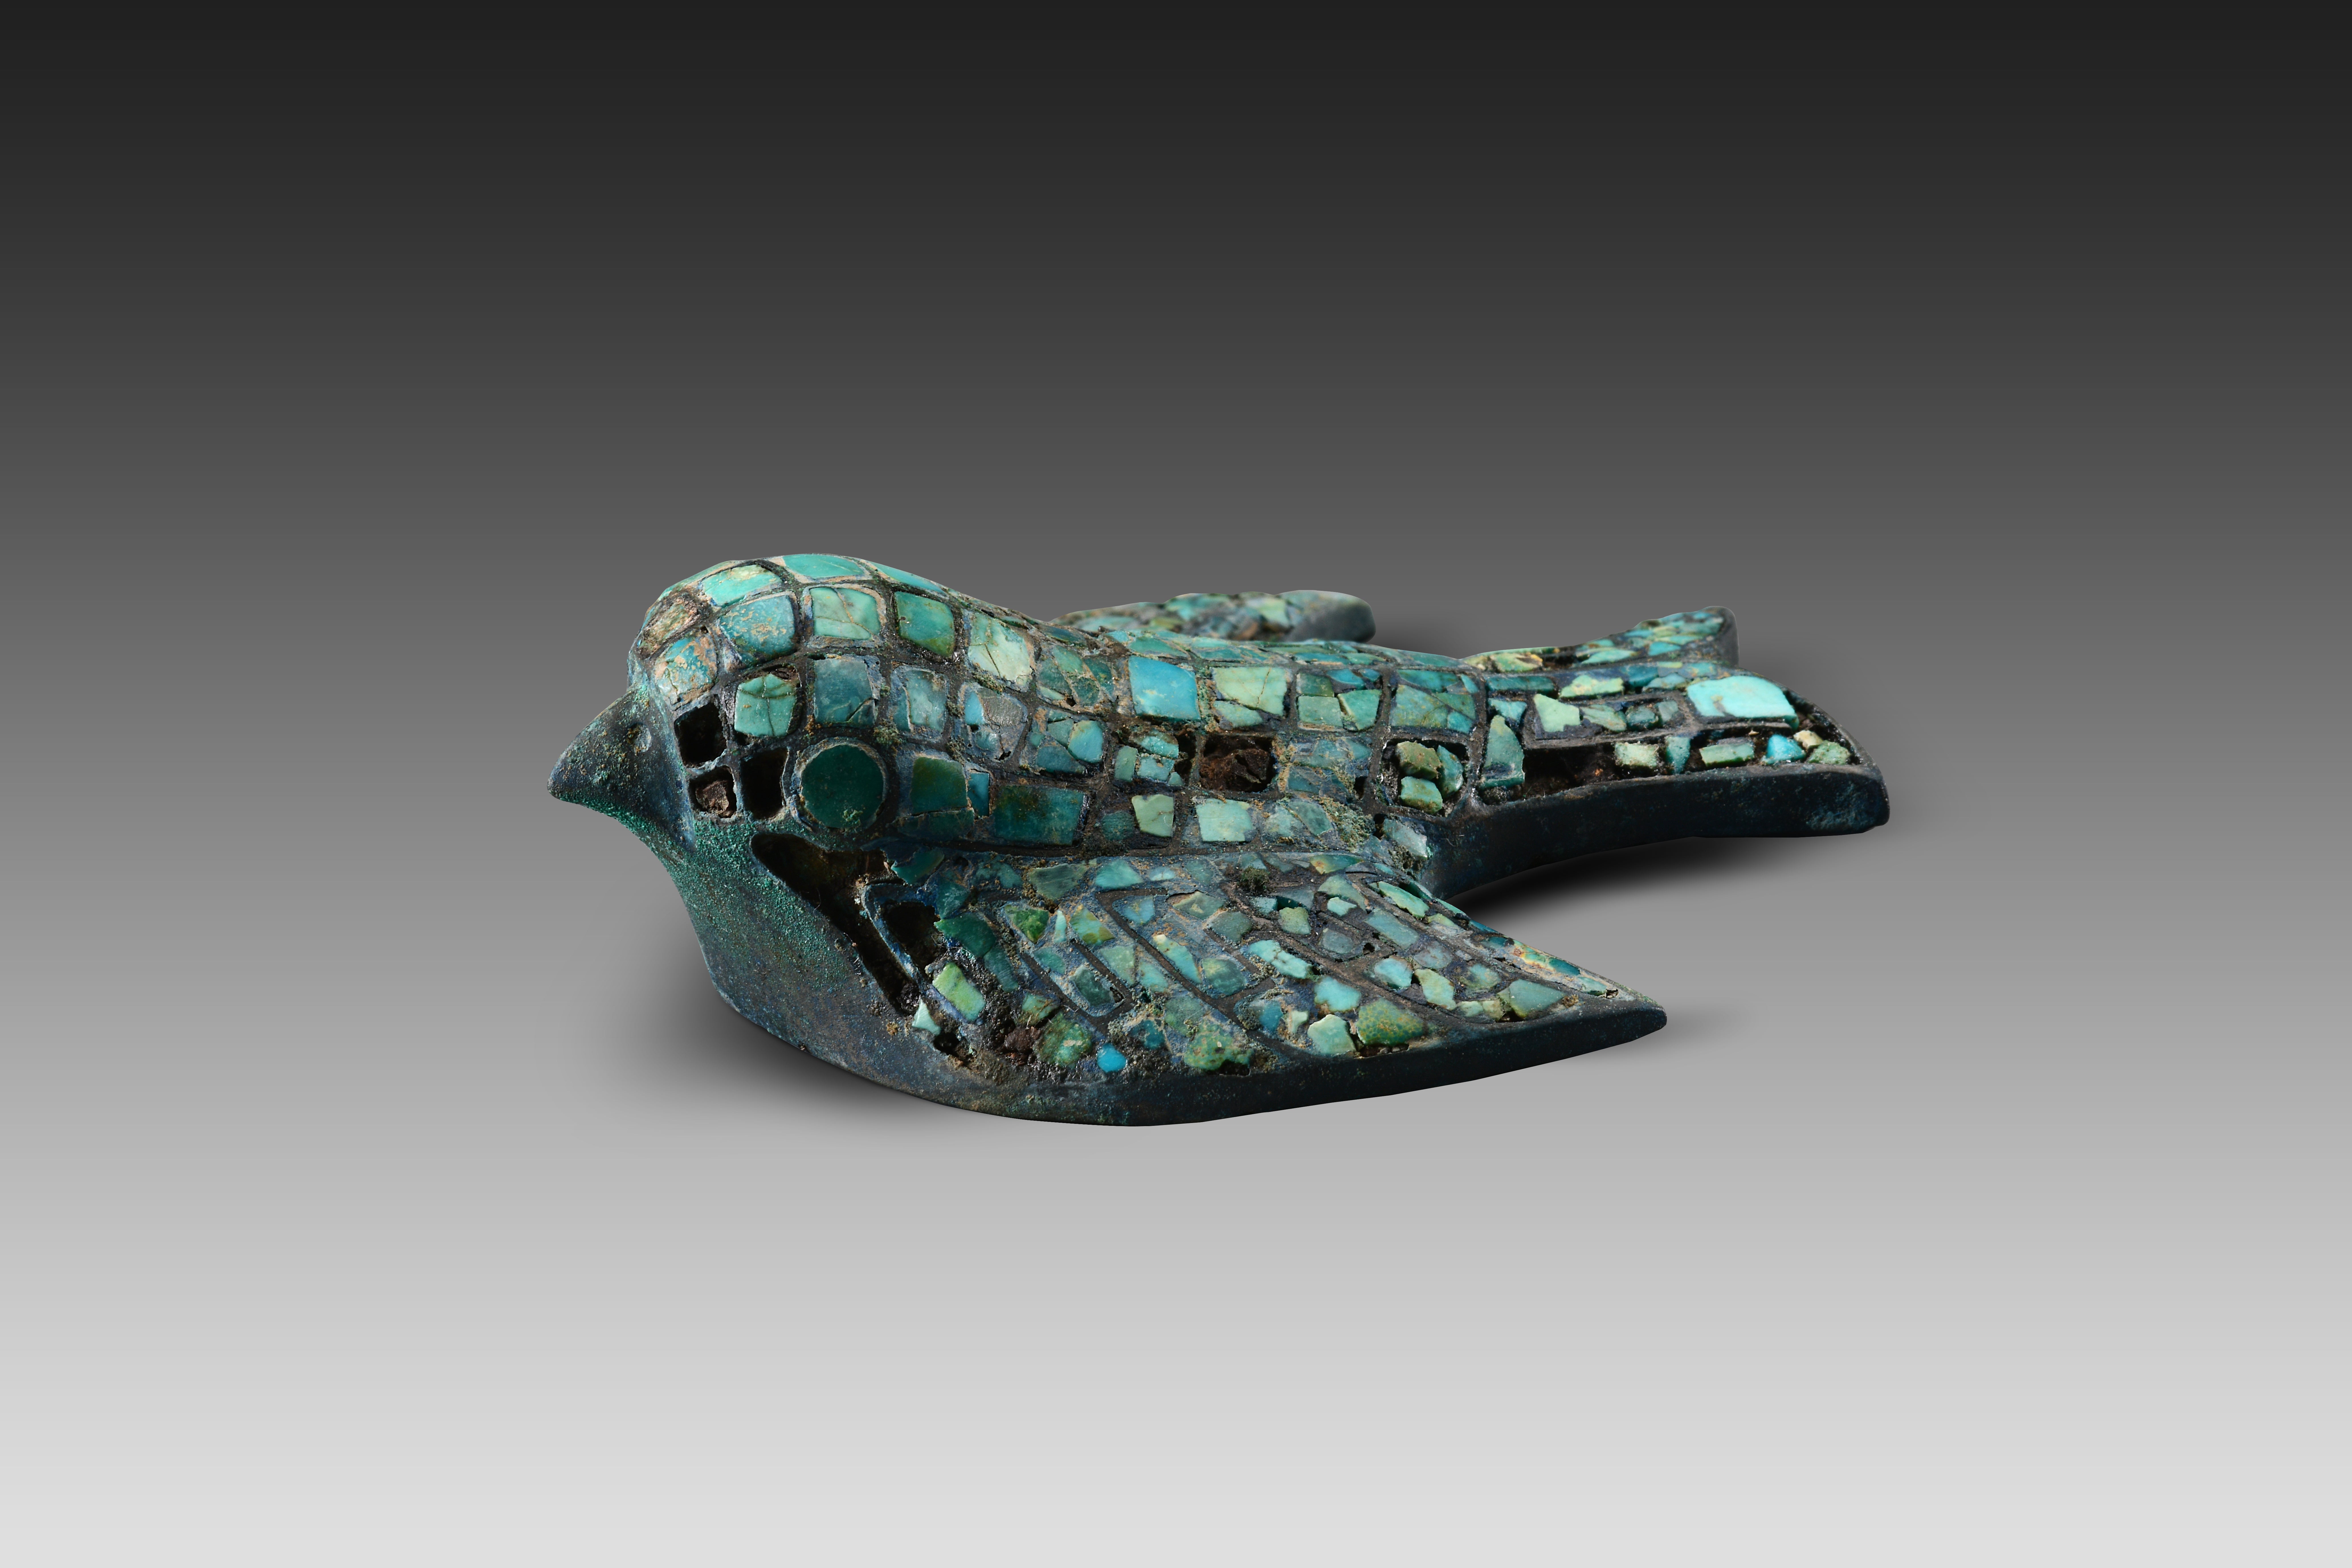 A bronze ornament in the shape of a bird decorated with turquoises found at the Zhaigou site